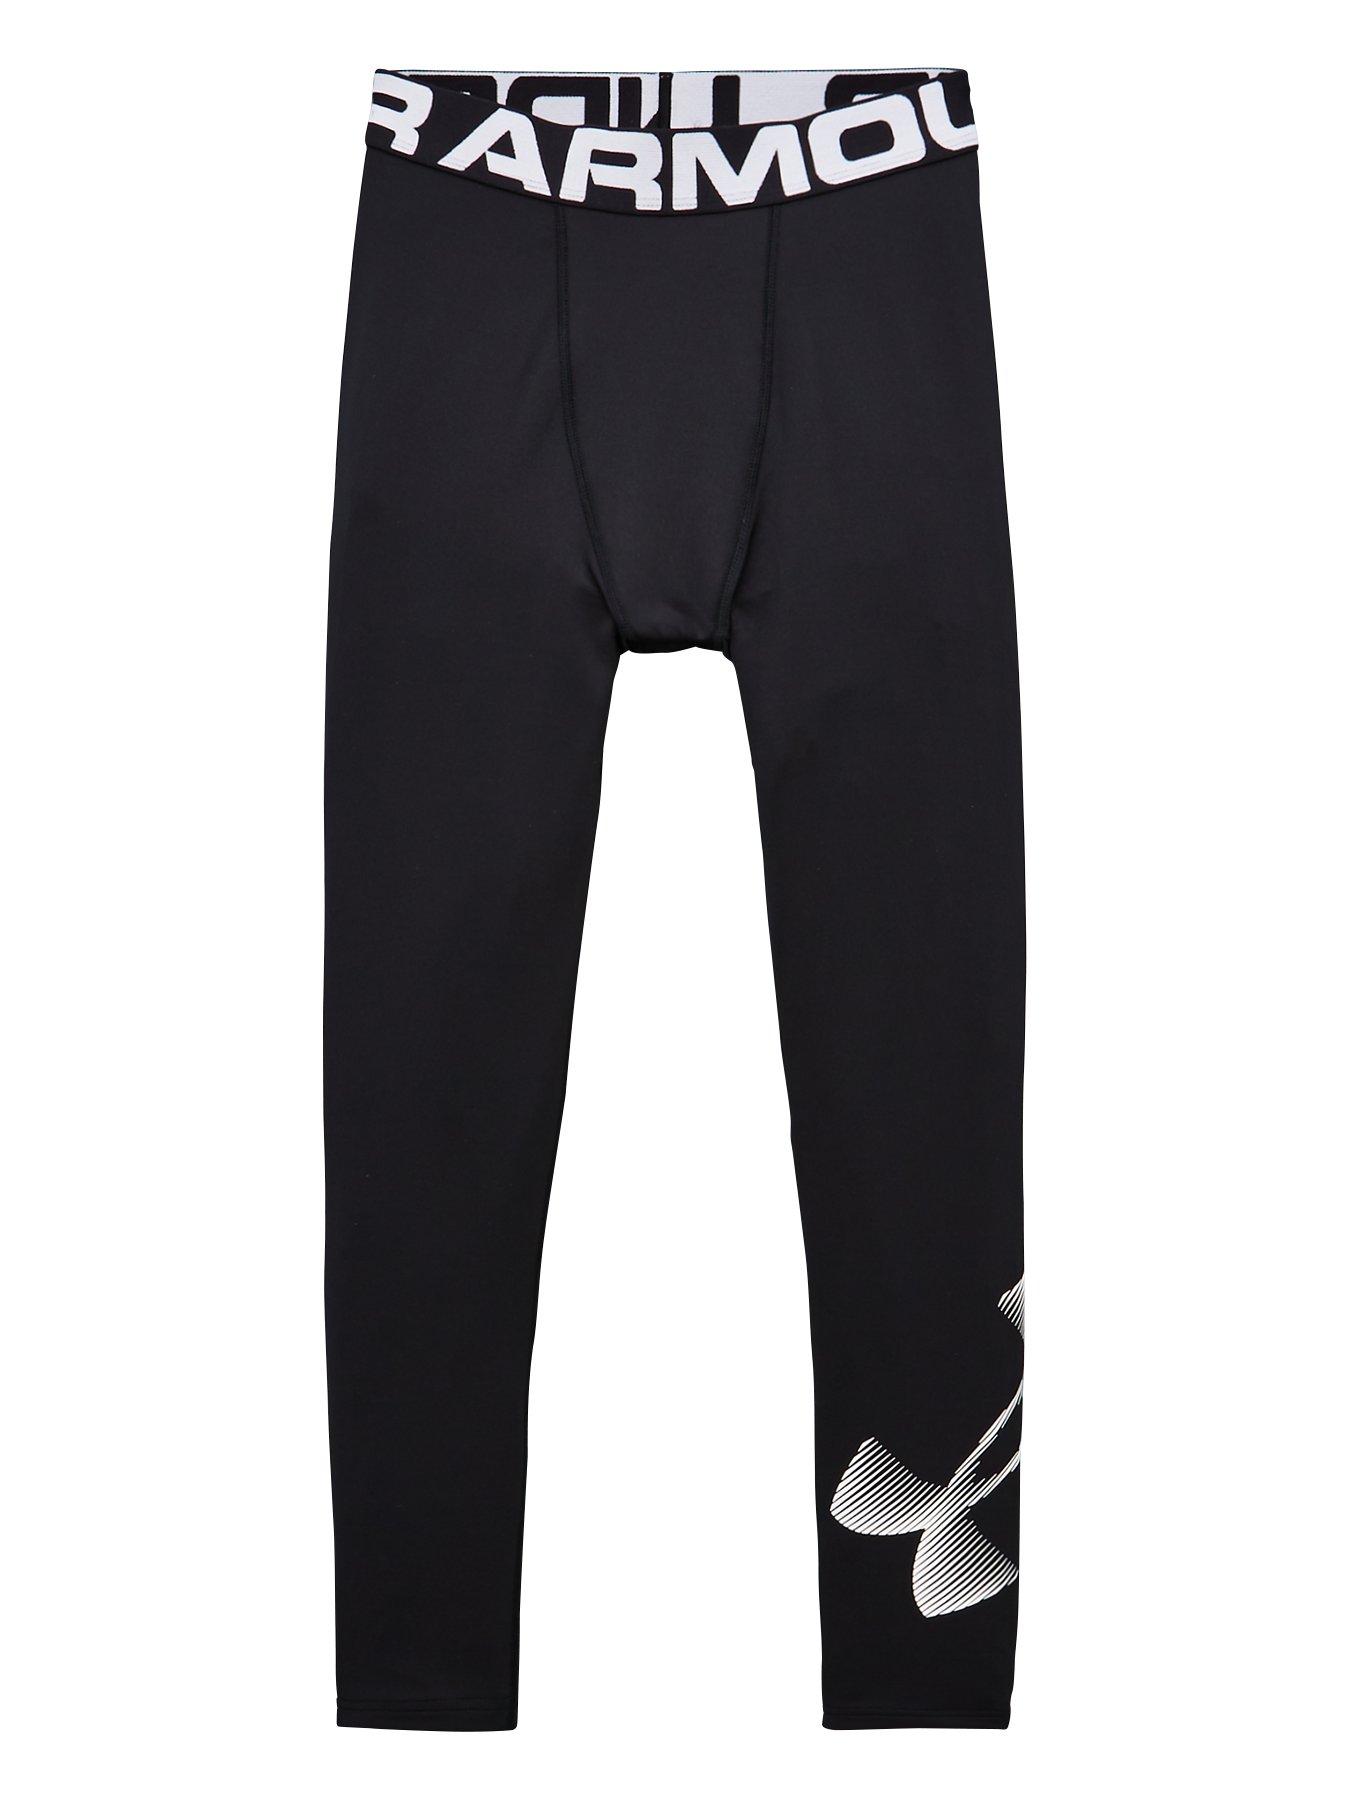 UNDER ARMOUR Men ColdGear® EVO Fitted Leggings Tights Size S-XL